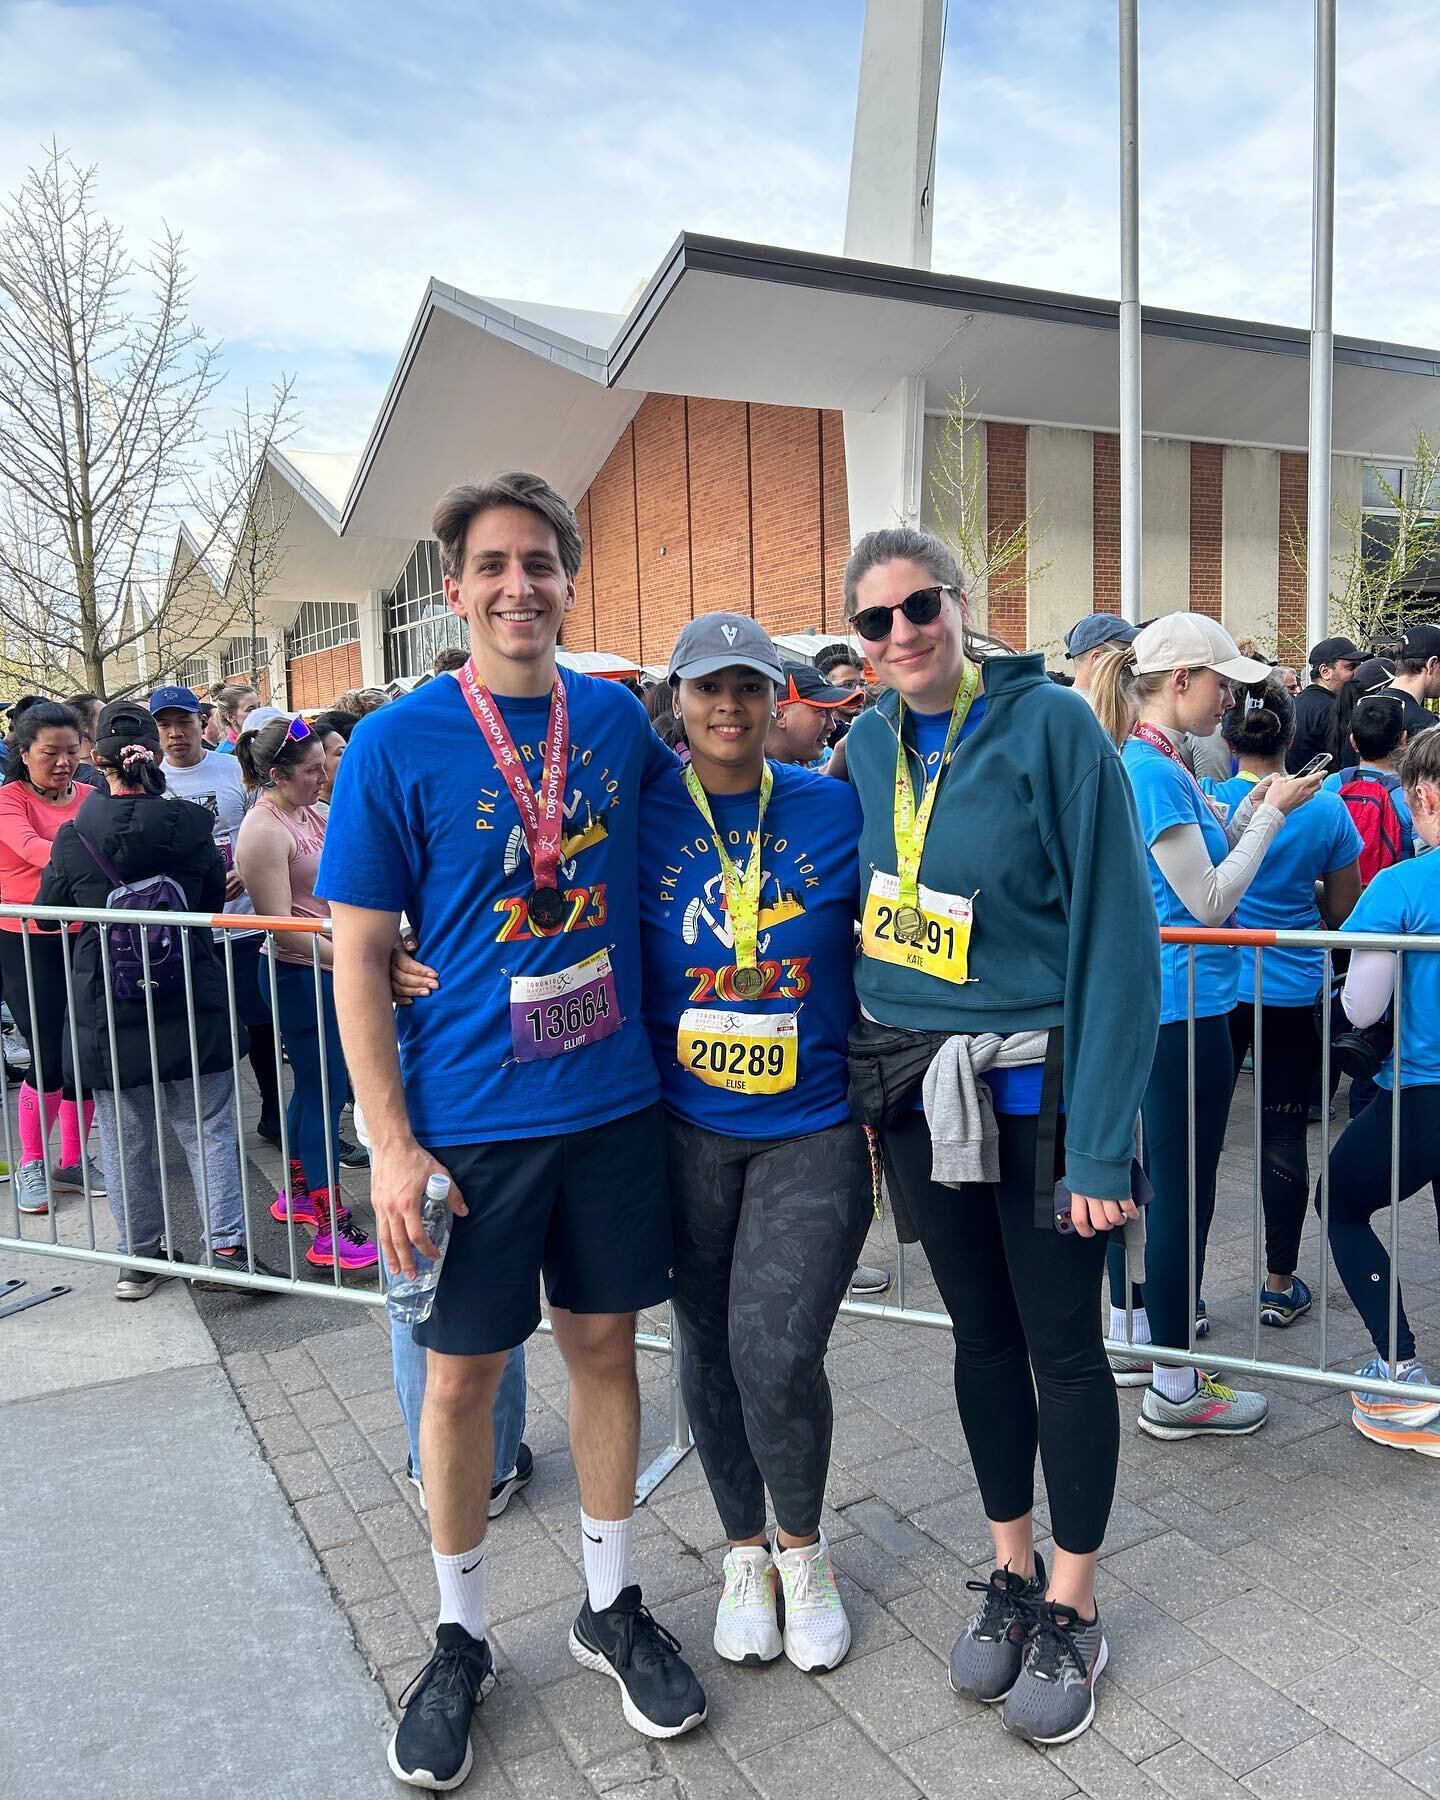 Here&rsquo;s the situation folks, Last week we ran in the Toronto Marathon 10k &amp; 5k race! We trained hard, we ran hard, and then ate hard at Skyline Restaurant (was is all an excuse to go for brunch&hellip; who can say really.) 

Ultimately it&rs